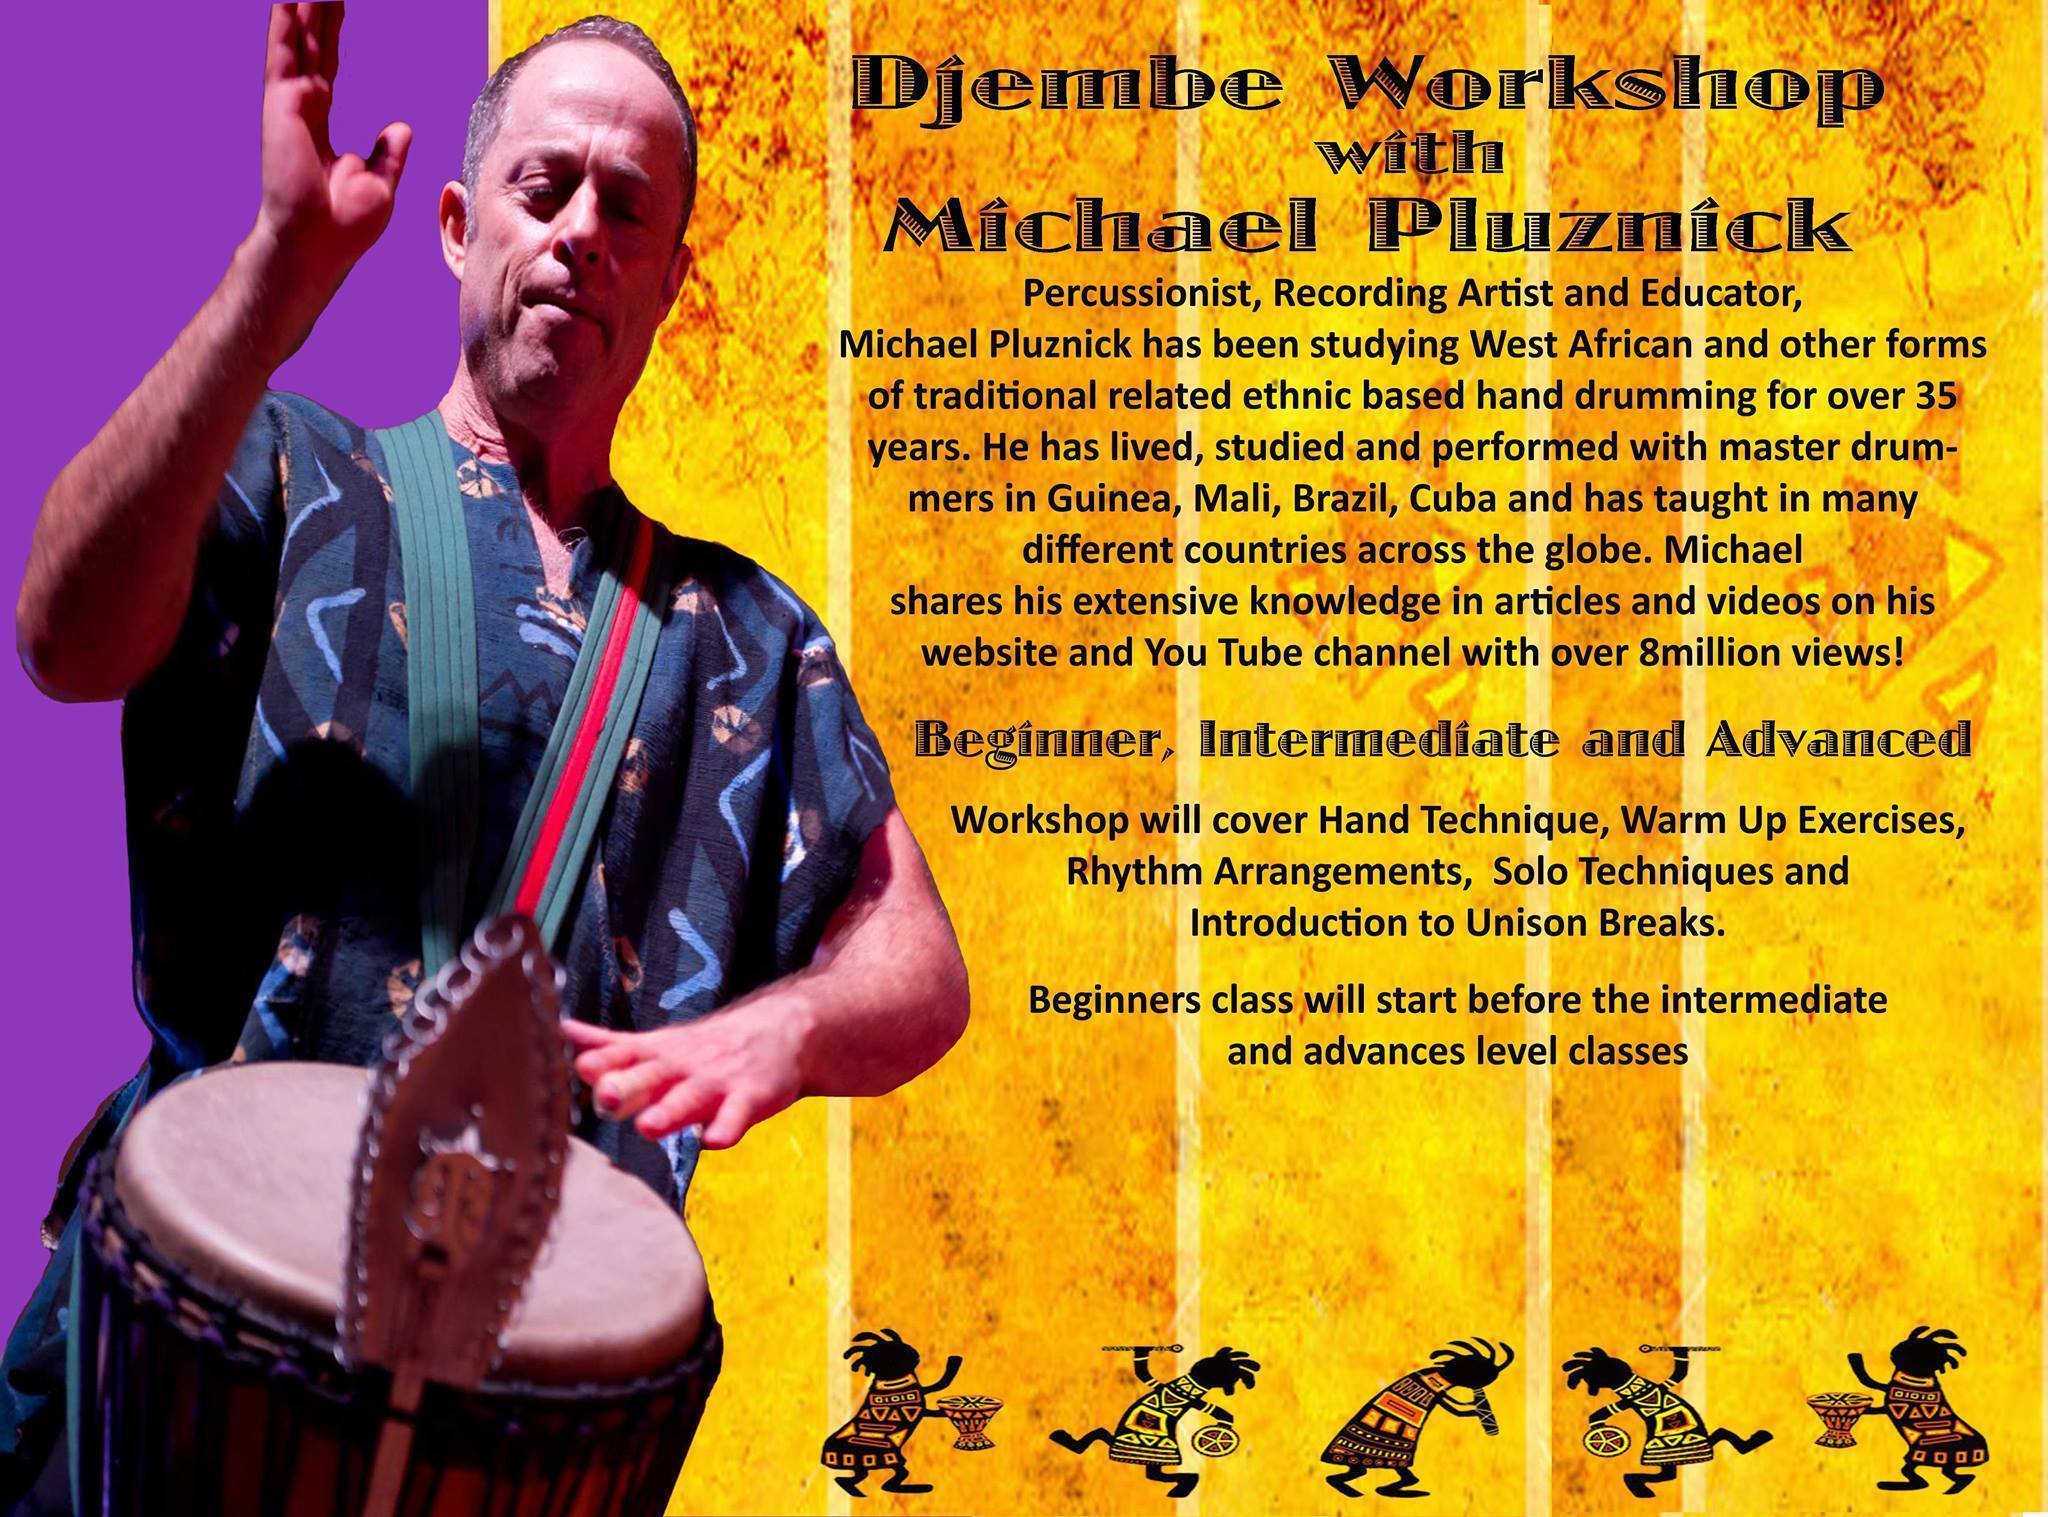 April 2019 World Wide Drum Workshops With Michael Pluznick in Thailand